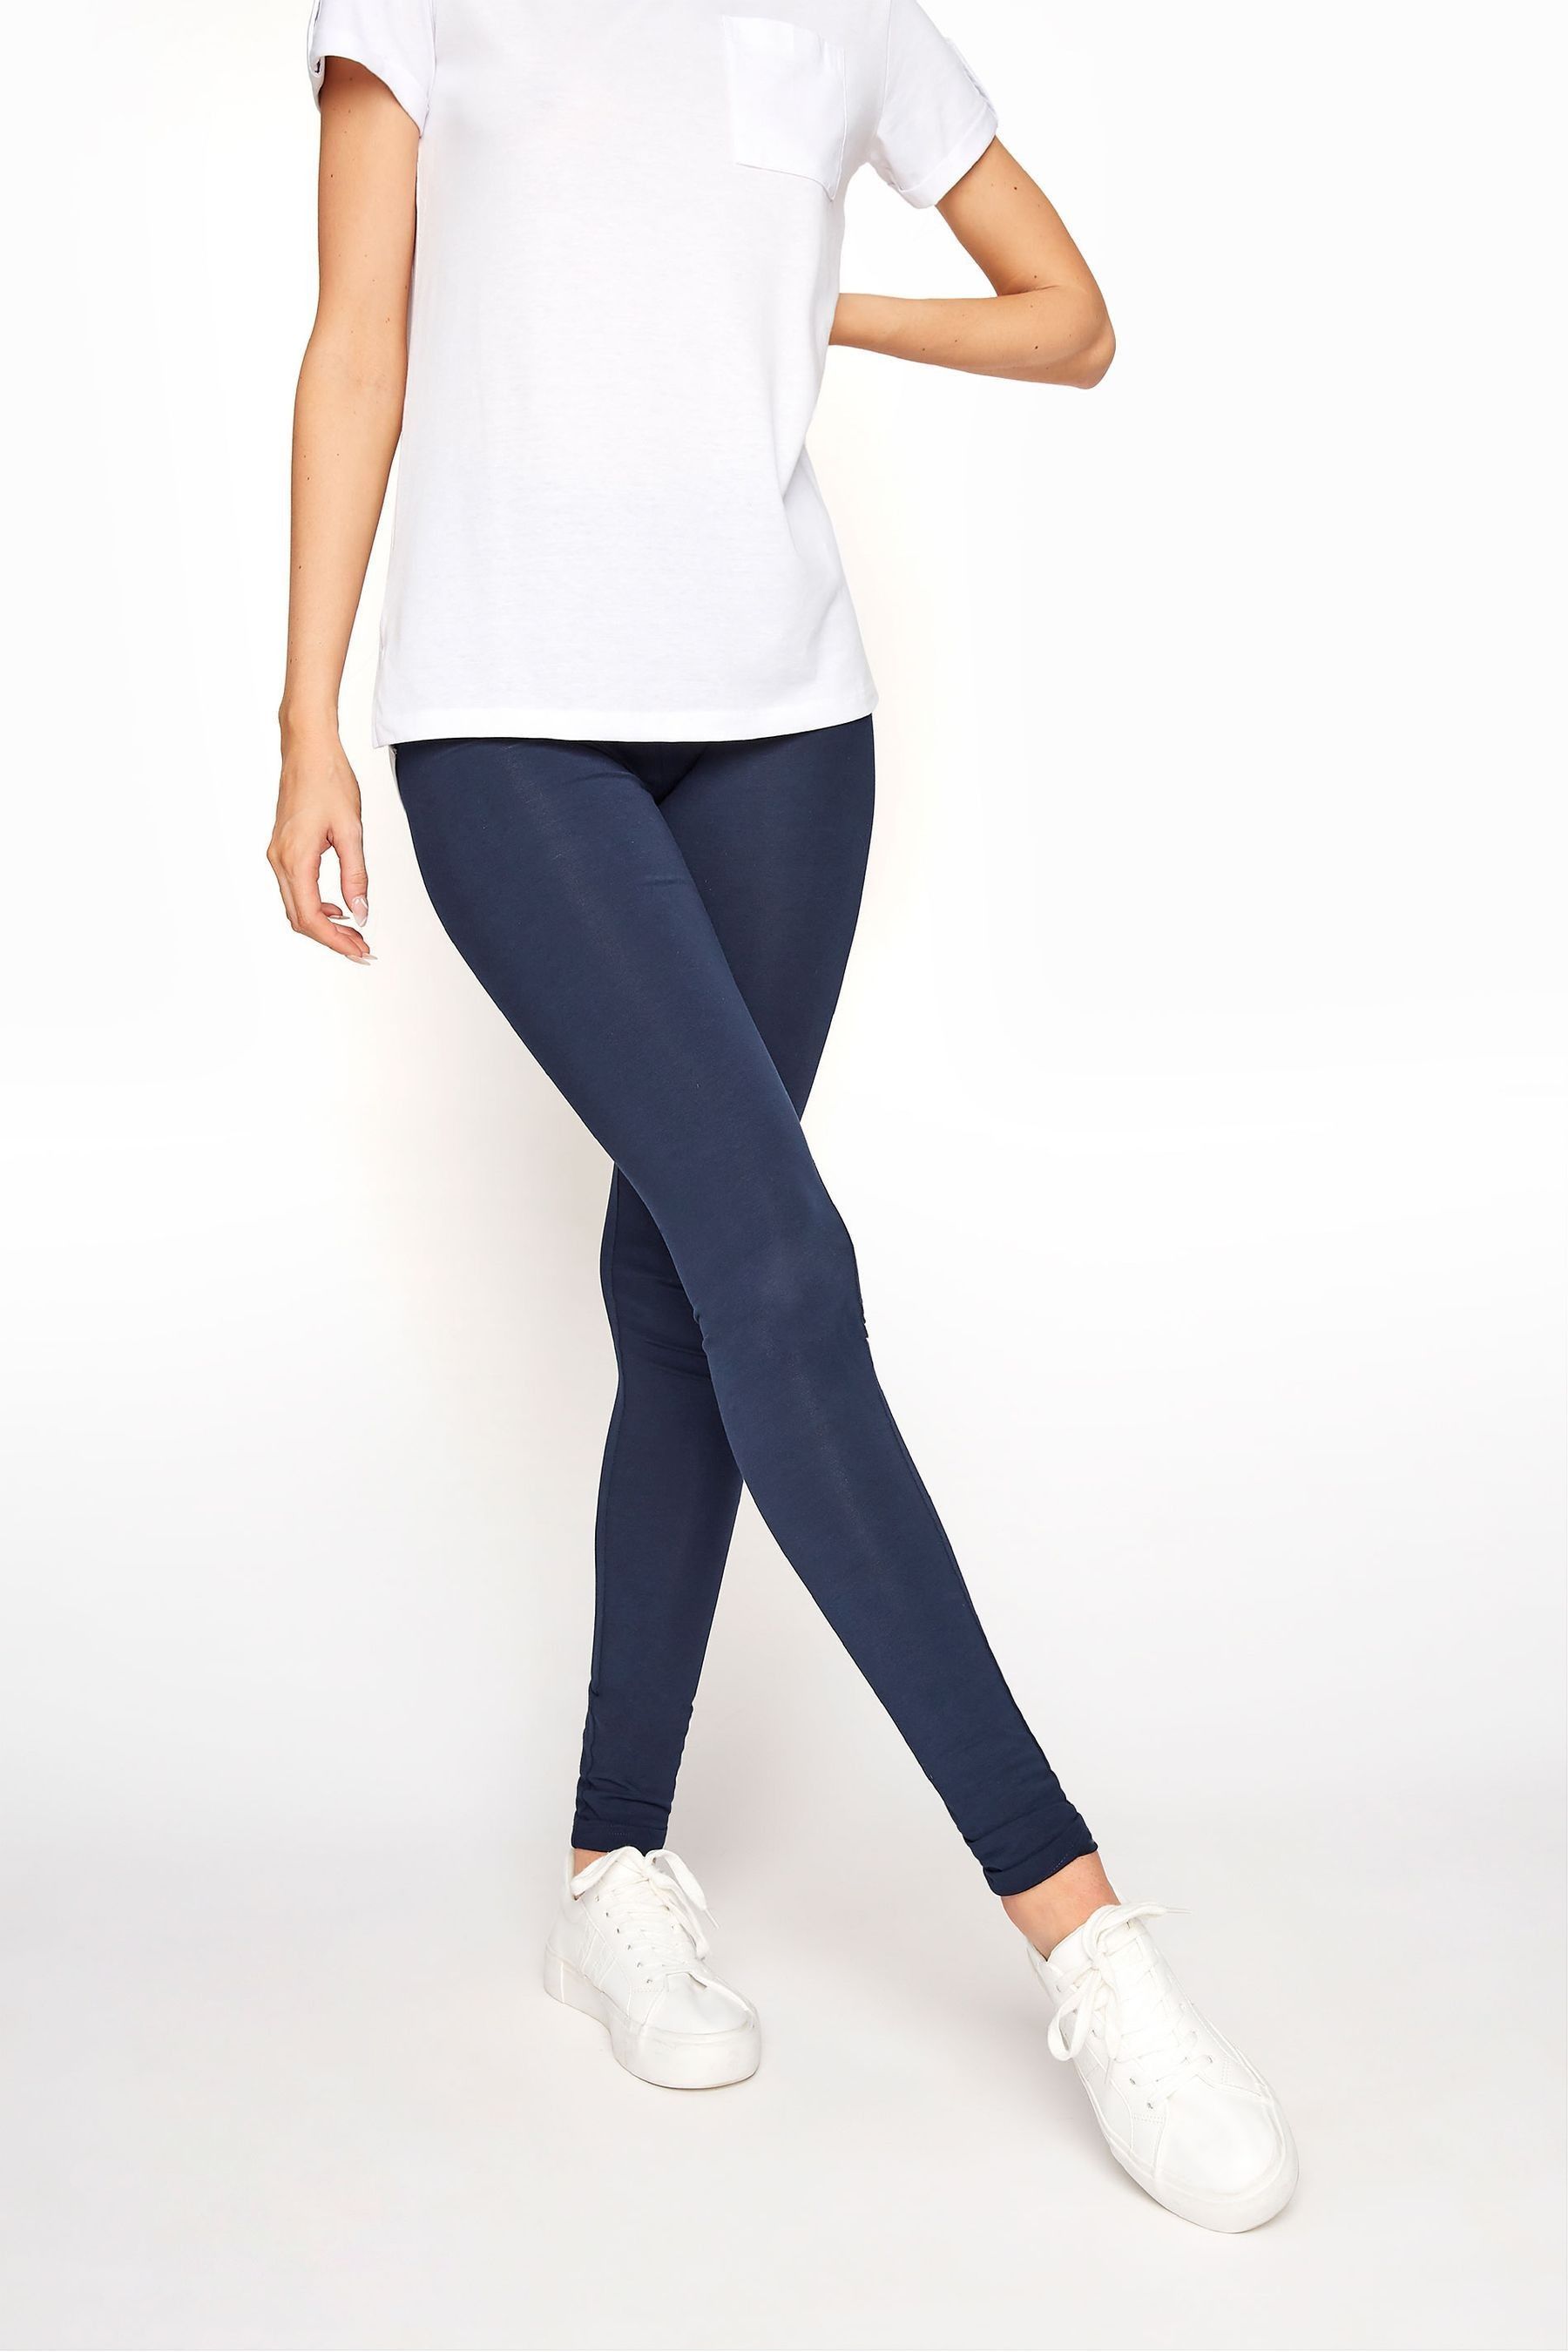 Buy TCG Bio wash 100% pure Cotton with Spandex Neon Gajri Ankle legging  Online at Low Prices in India - Paytmmall.com